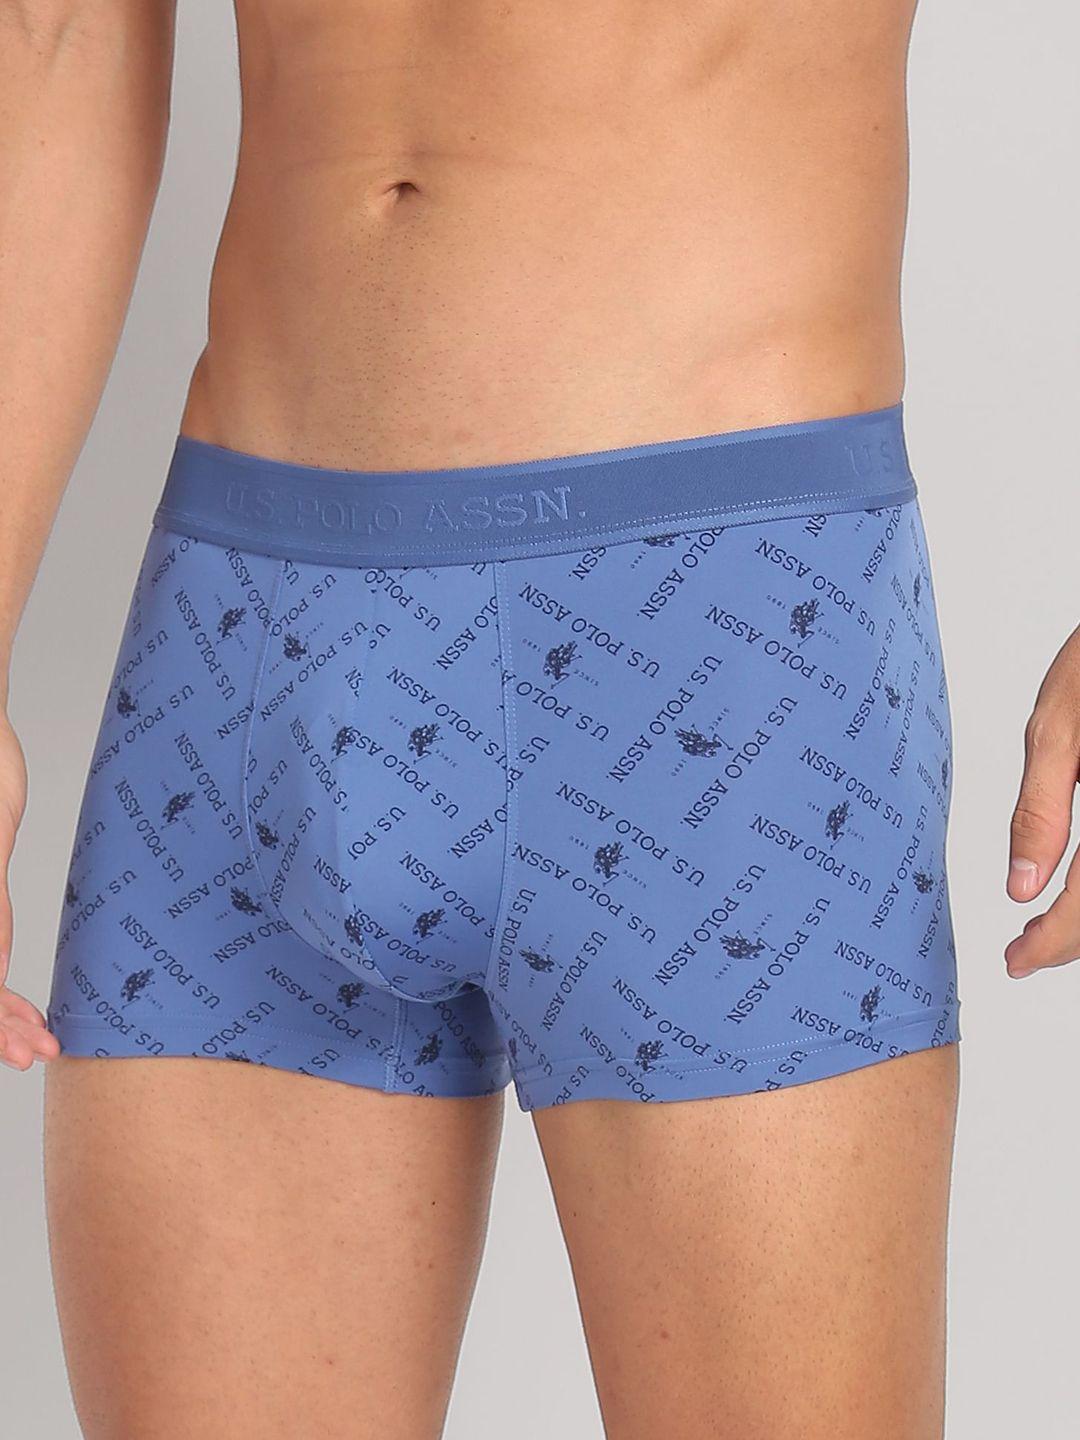 u.s. polo assn. men printed stretchable trunk